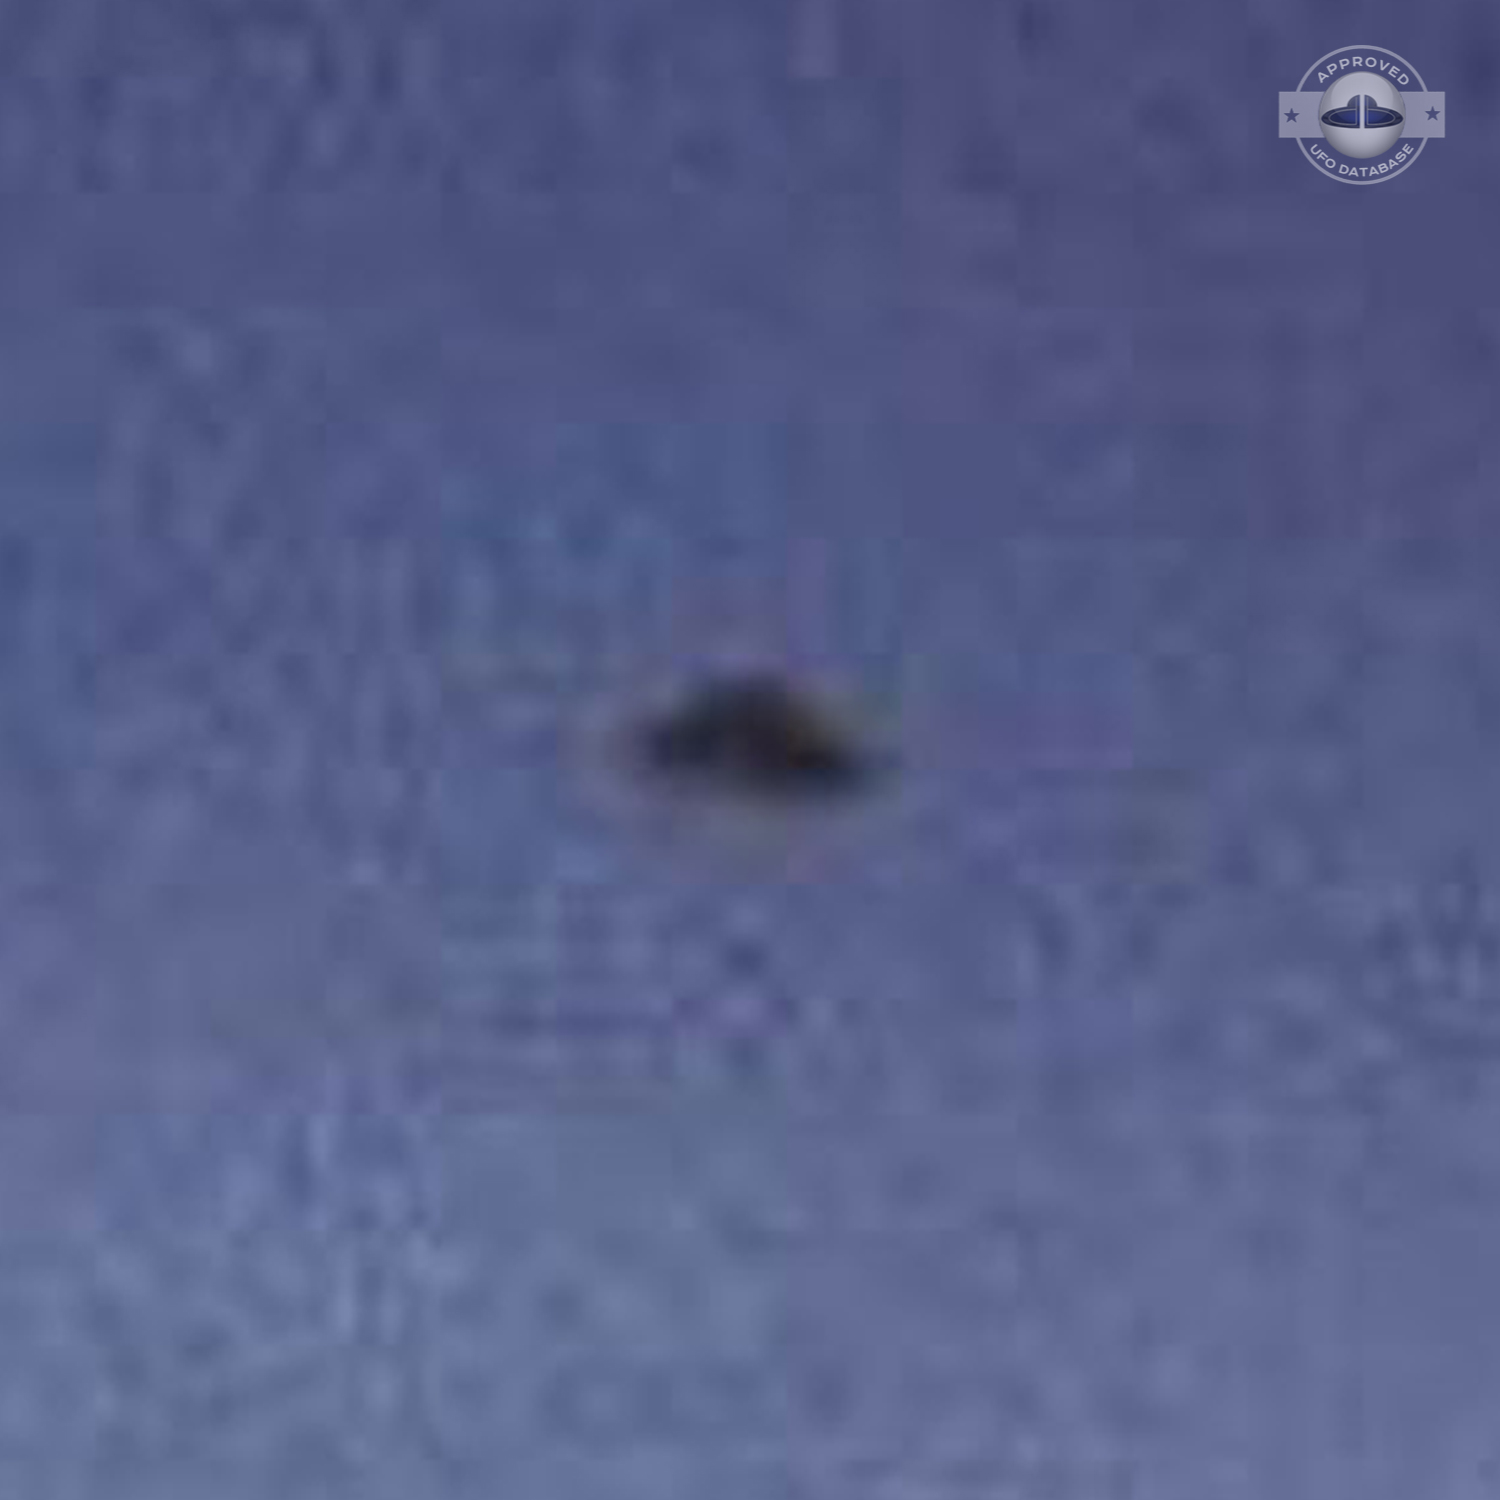 UFO seen over the Valdes peninsula near the city of Puerto Madryn UFO Picture #27-3